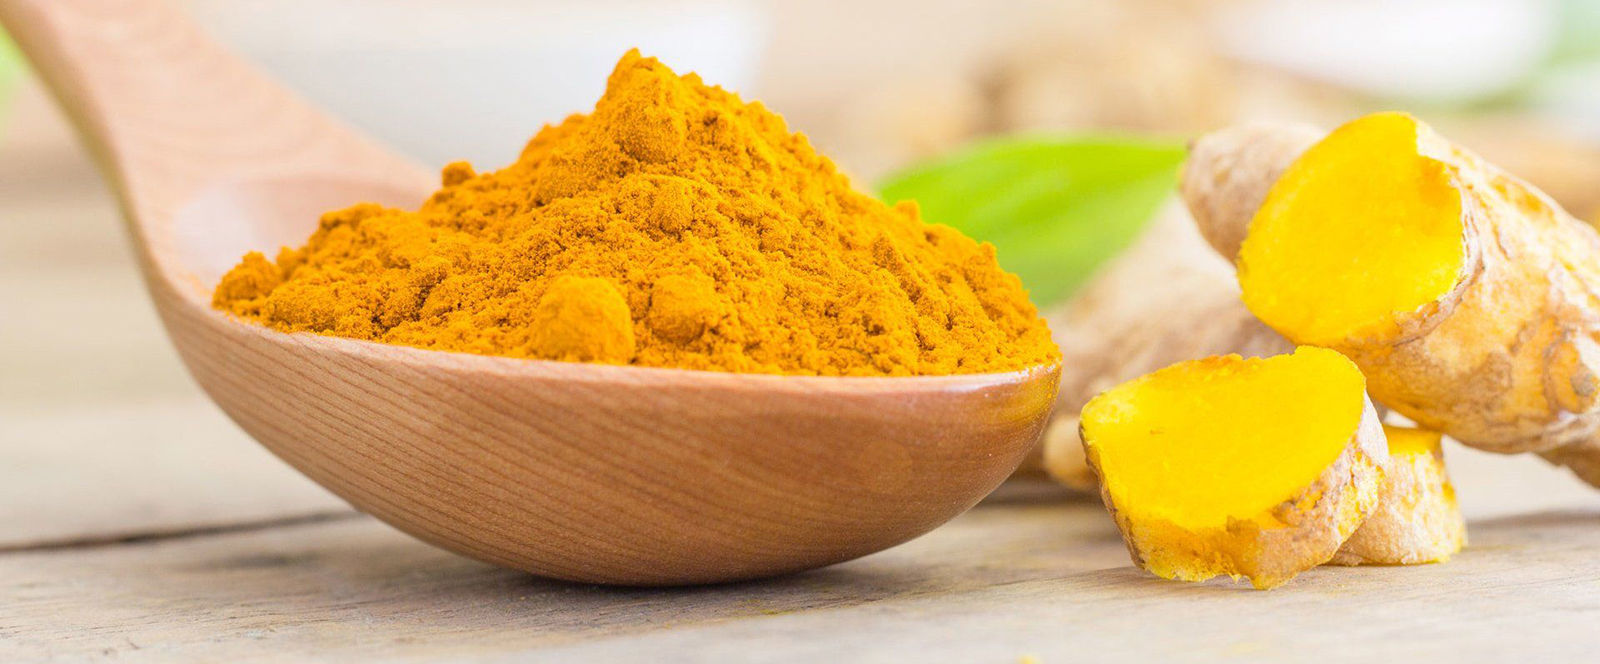 We Manufacture Curcumin Which is Derived from Turmeric